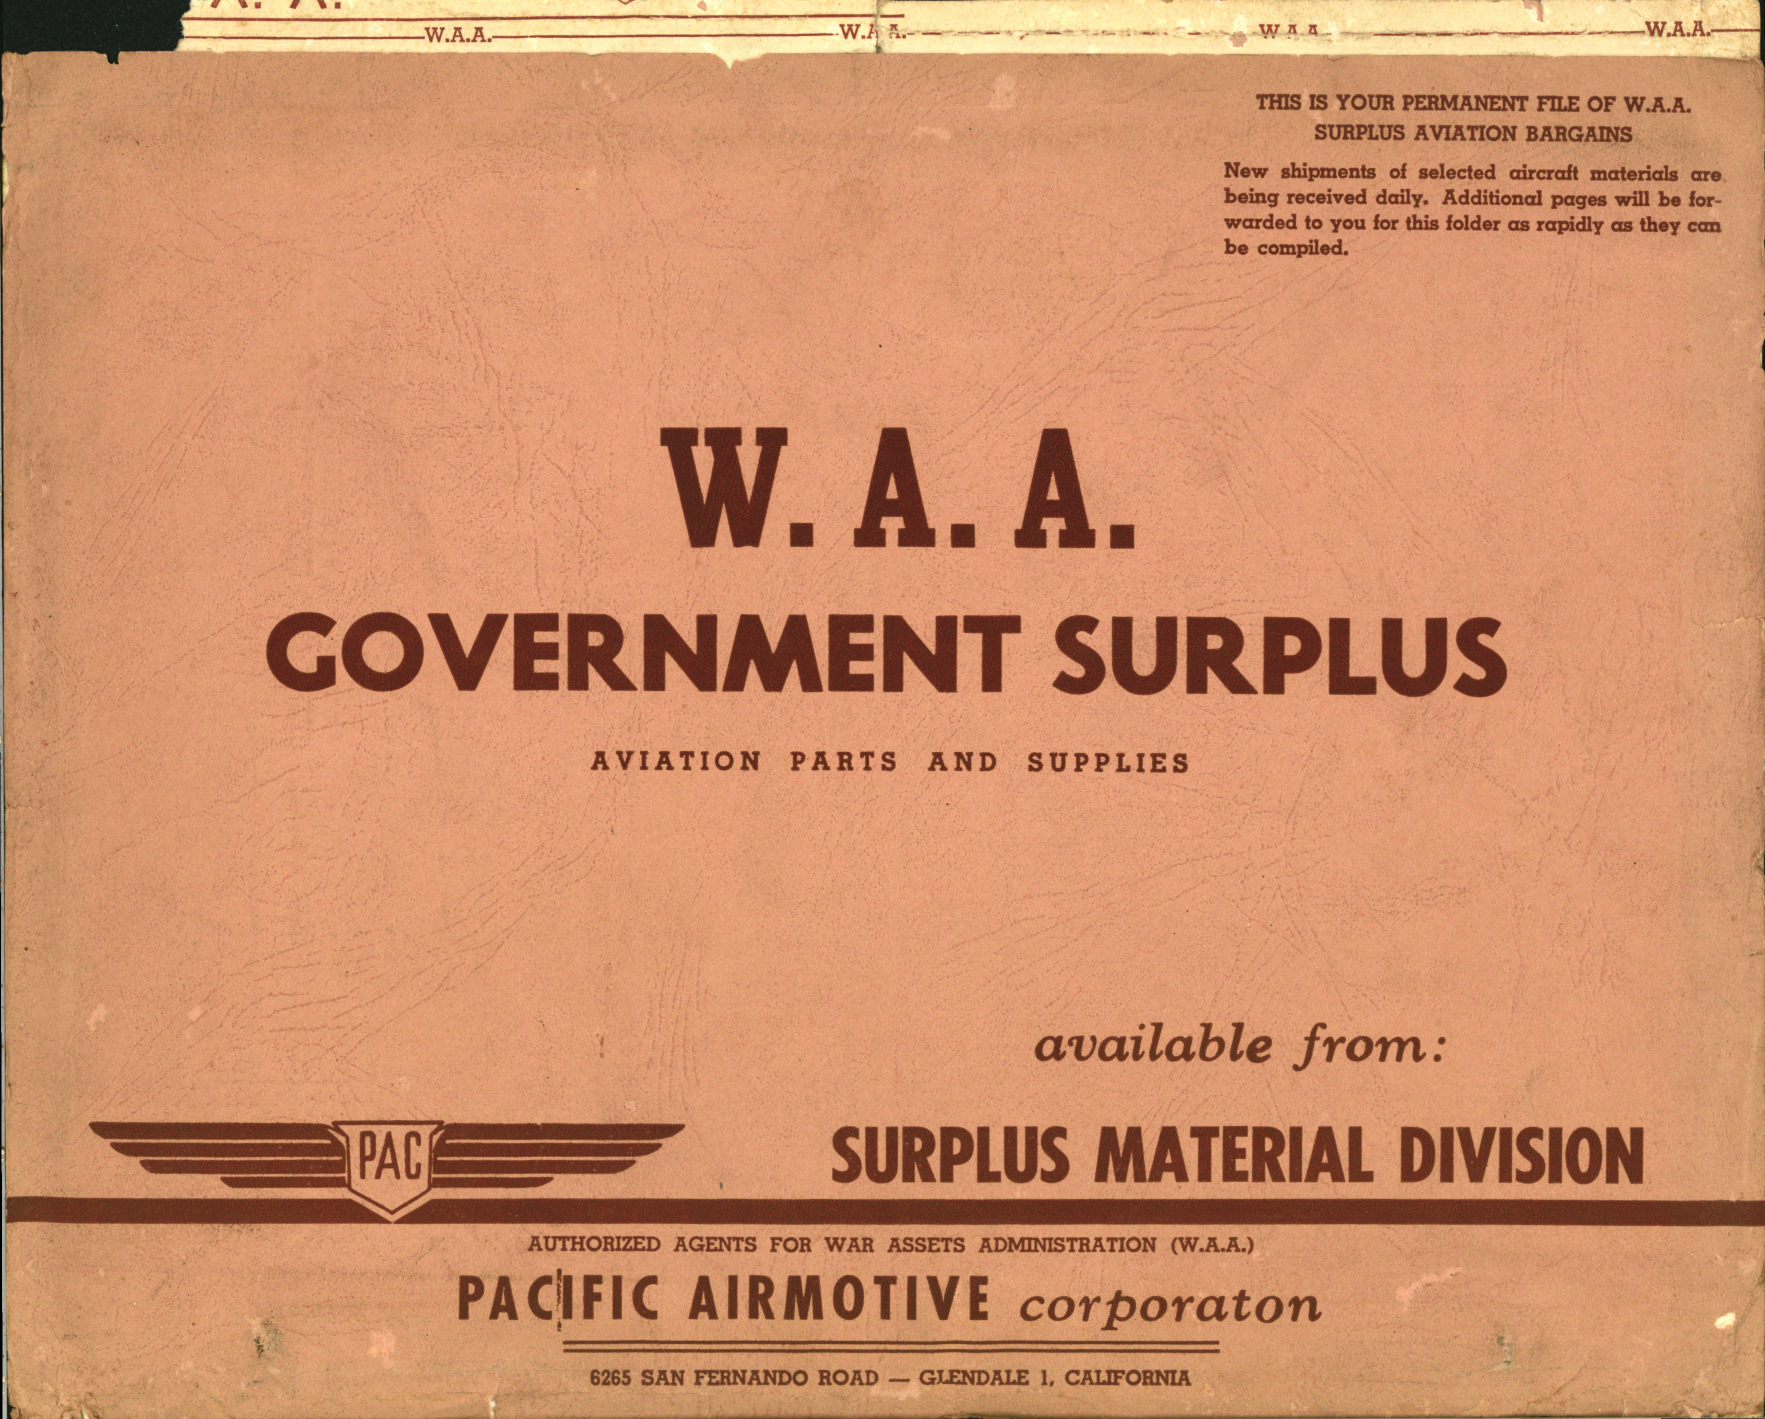 Sample page 1 from AirCorps Library document: W.A.A. Government Surplus, Aviation Parts and Supplies